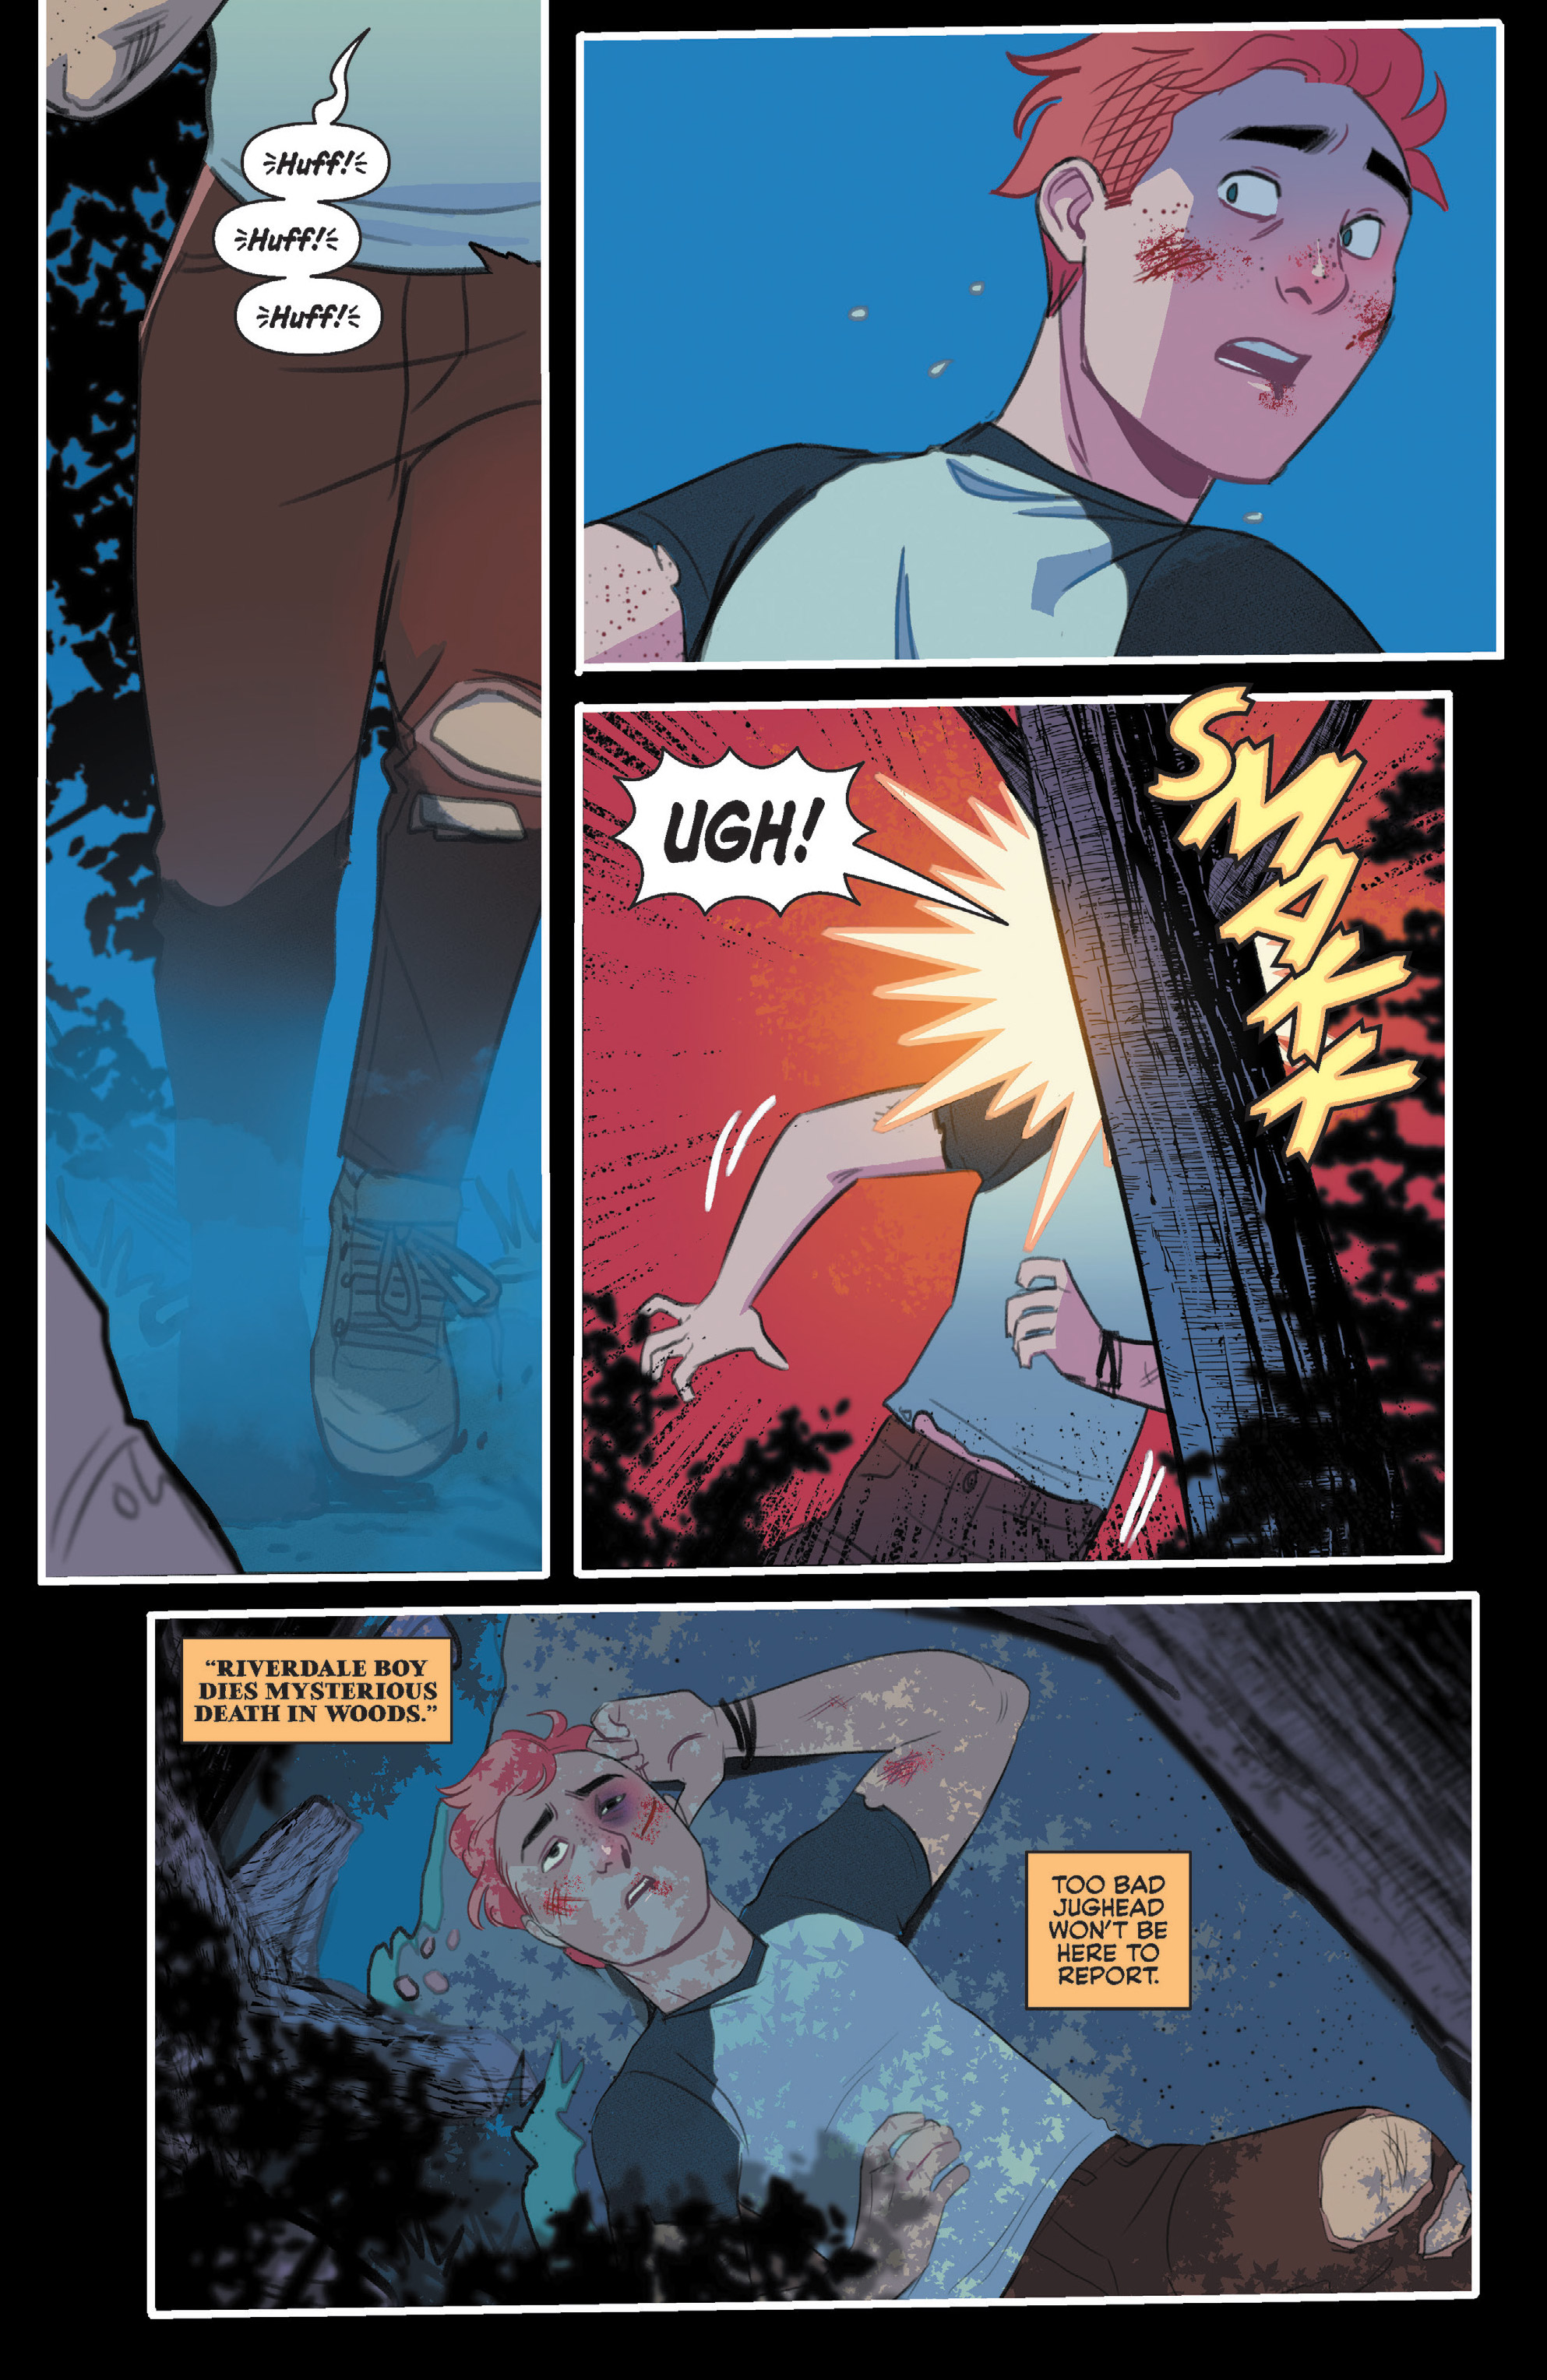 Archie (2015-): Chapter 707 - Page 4